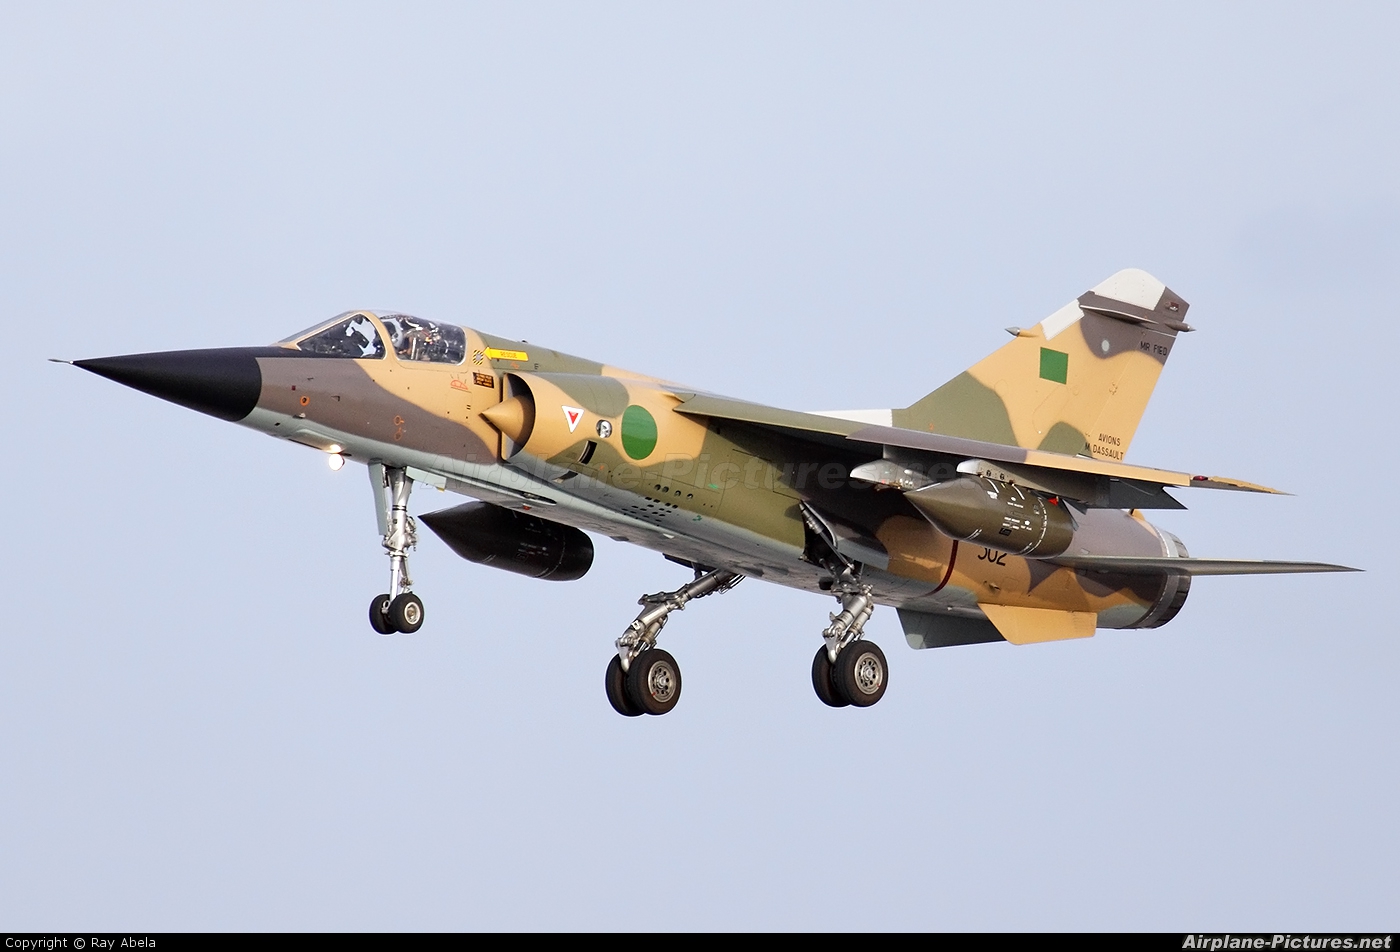 Libyan Air Force Mirage fighter jets 